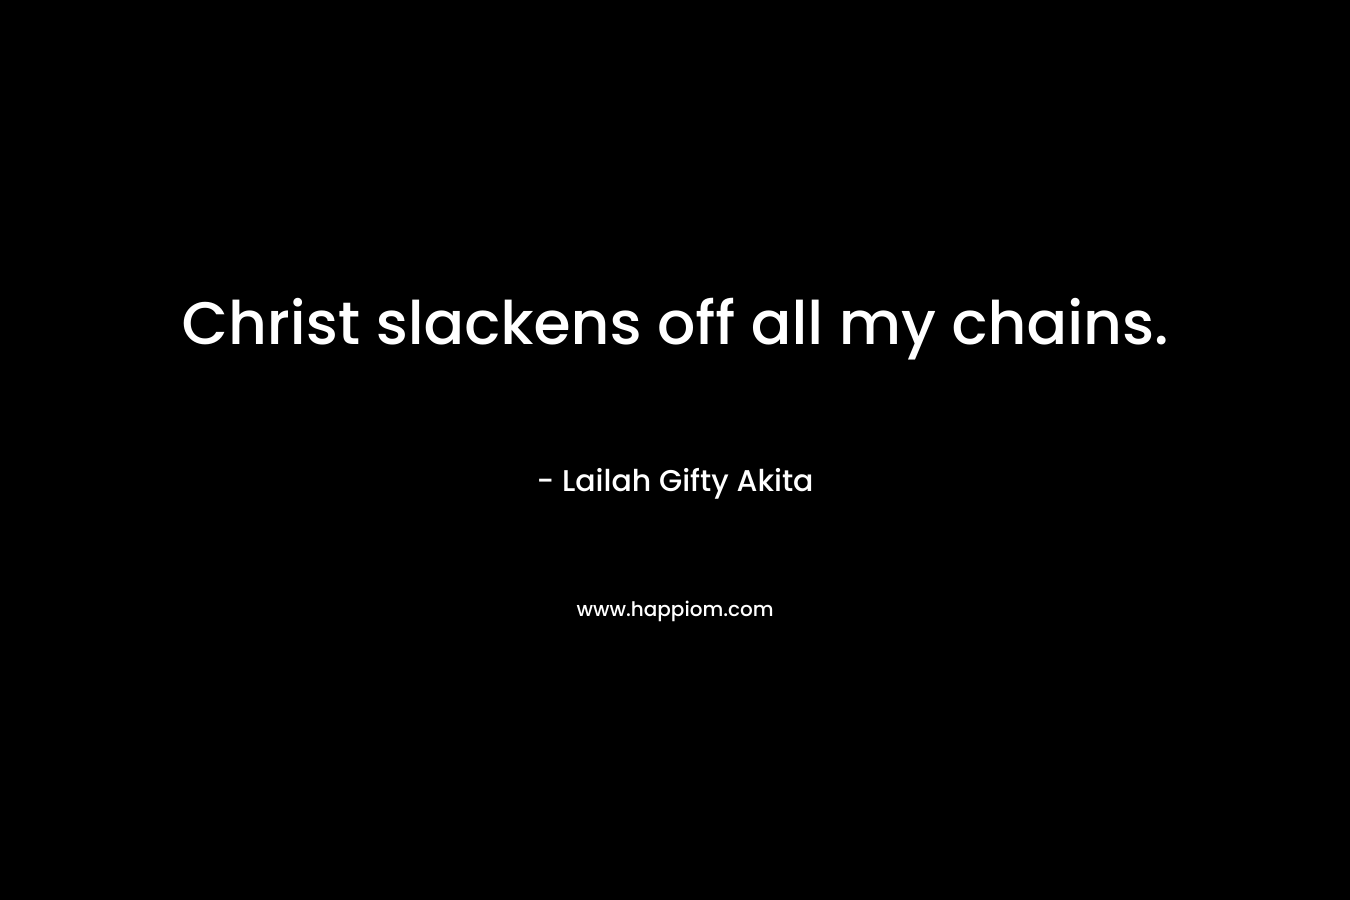 Christ slackens off all my chains.